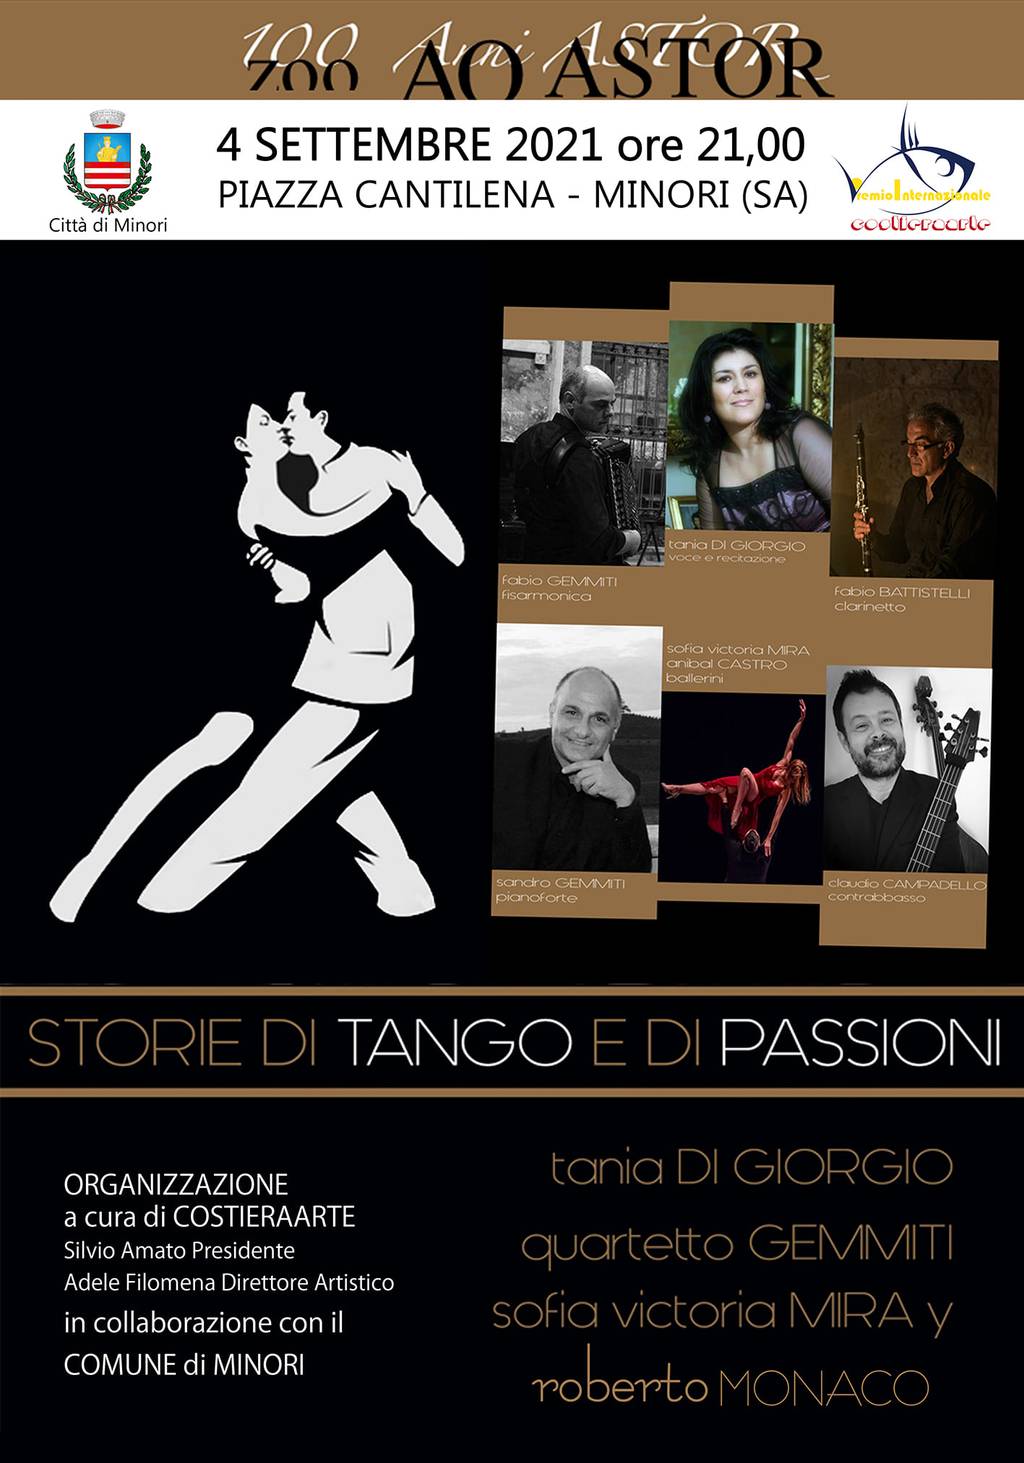 Stories of tango and passions